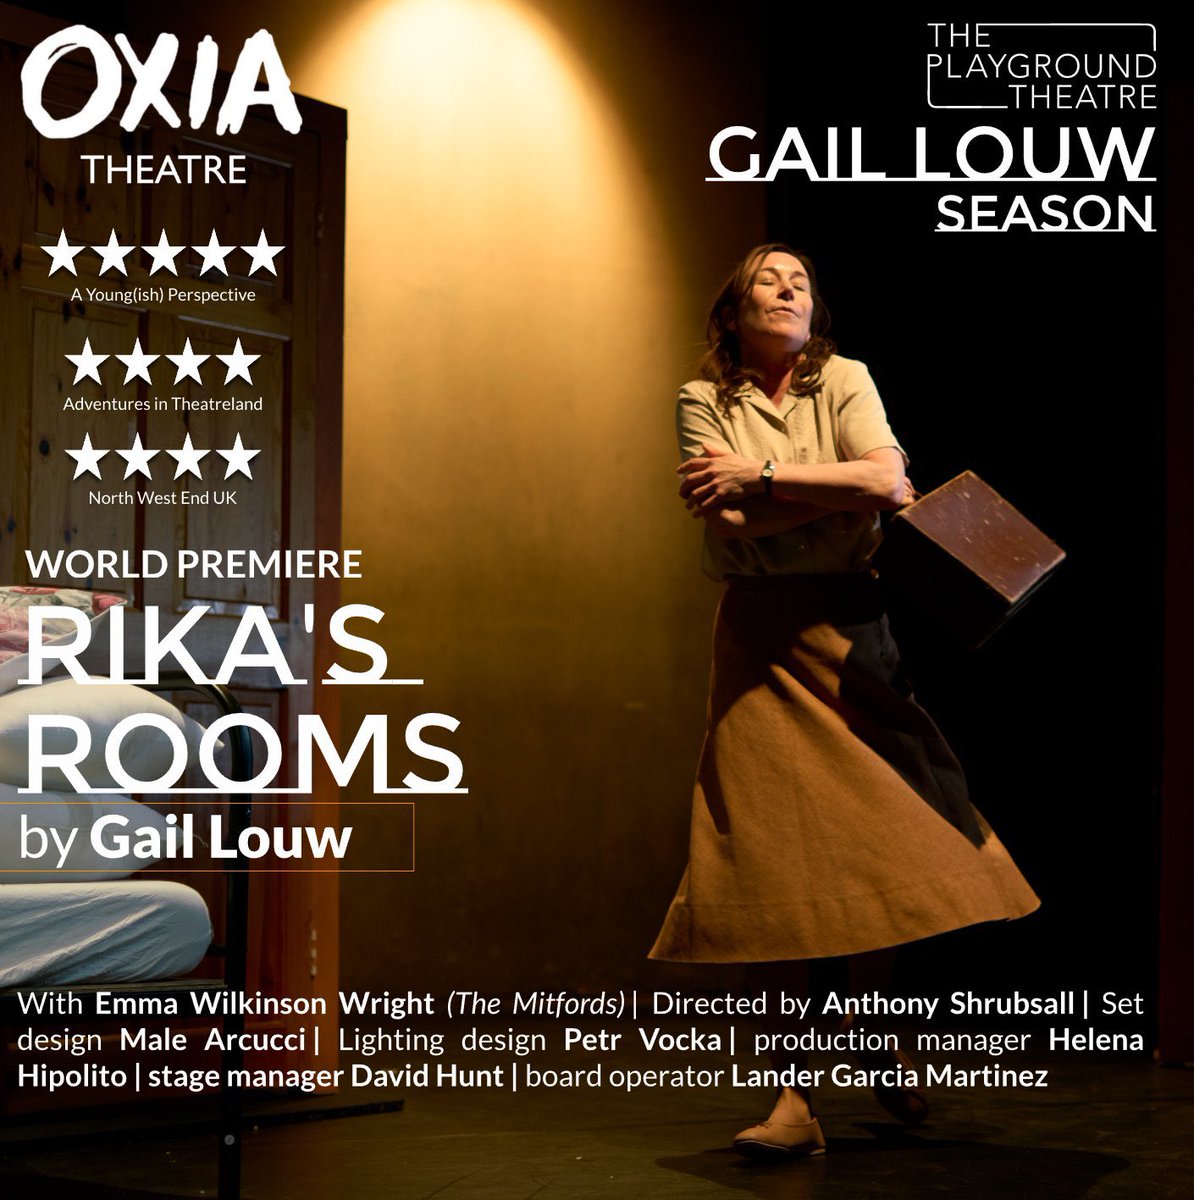 Holy mother of god RIKA’S ROOMS @playgroundw10 is off-the-scale good. Can’t find the right superlative. I saw the show on Wednesday and have never sat so still in my seat. Utterly held. @emmamaywright is breathtaking. Seriously unmissable theatre. Tonight at 7.30, tomorrow at 4pm